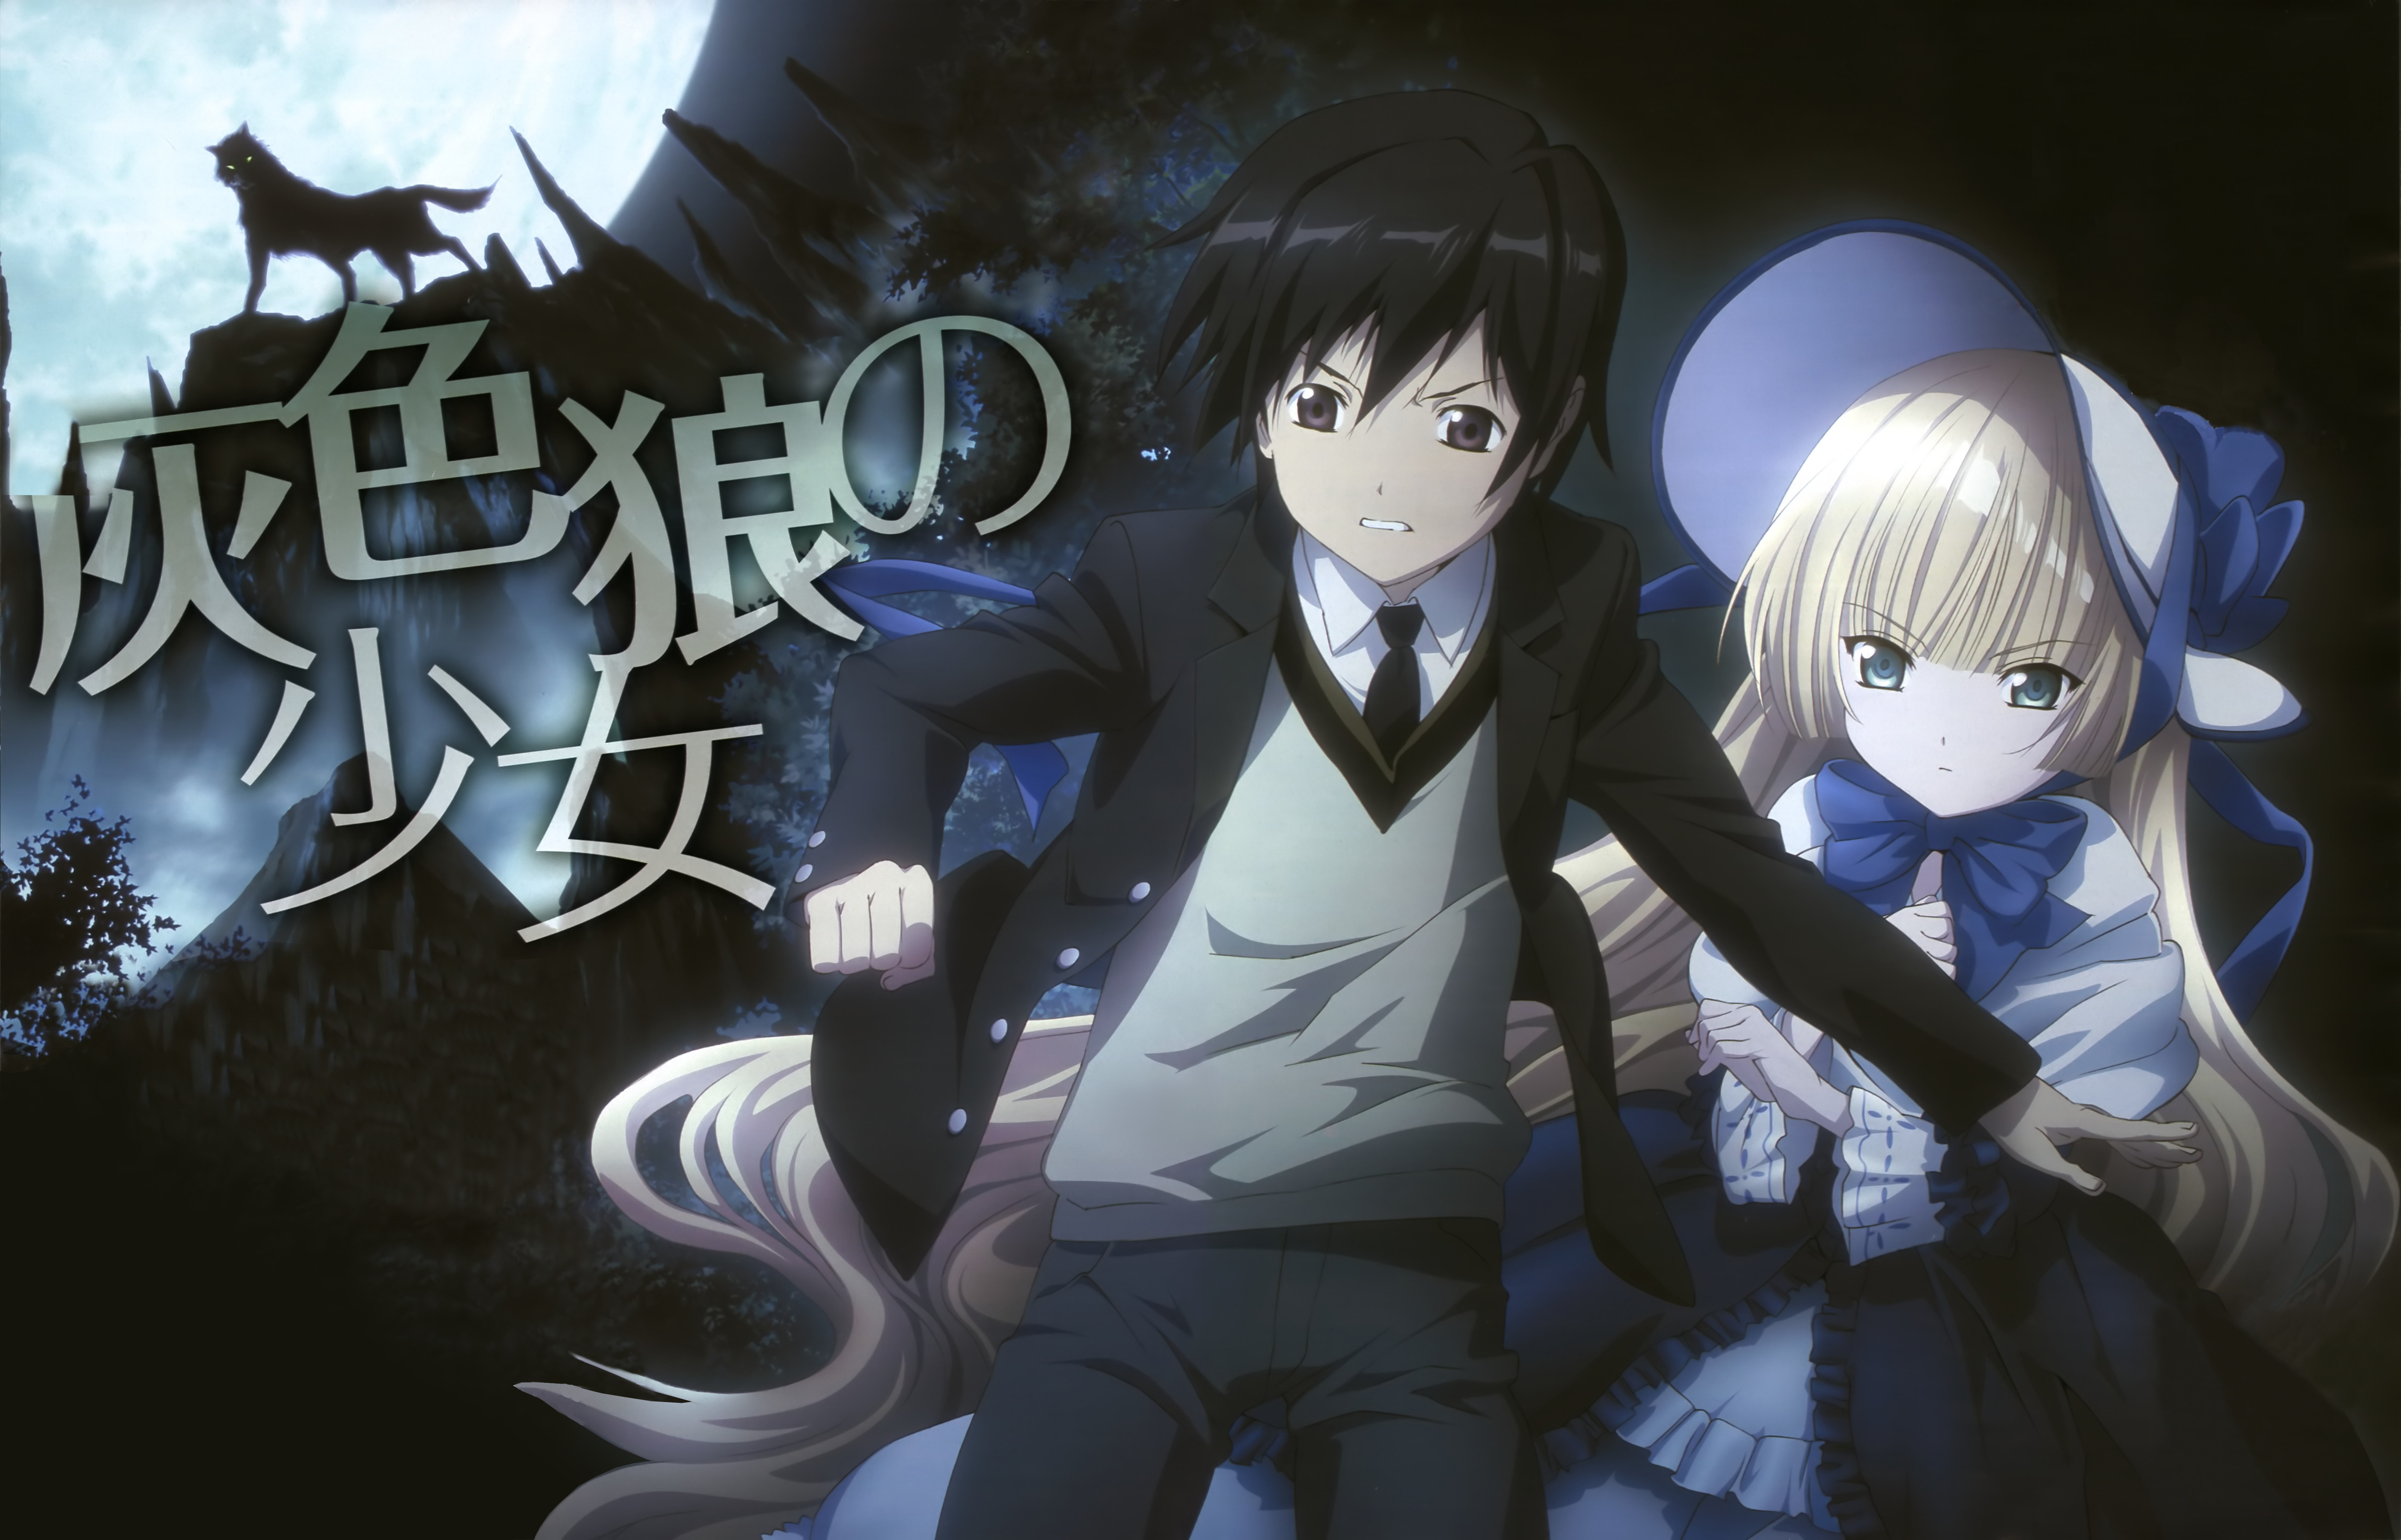 Nice Images Collection: Gosick Desktop Wallpapers